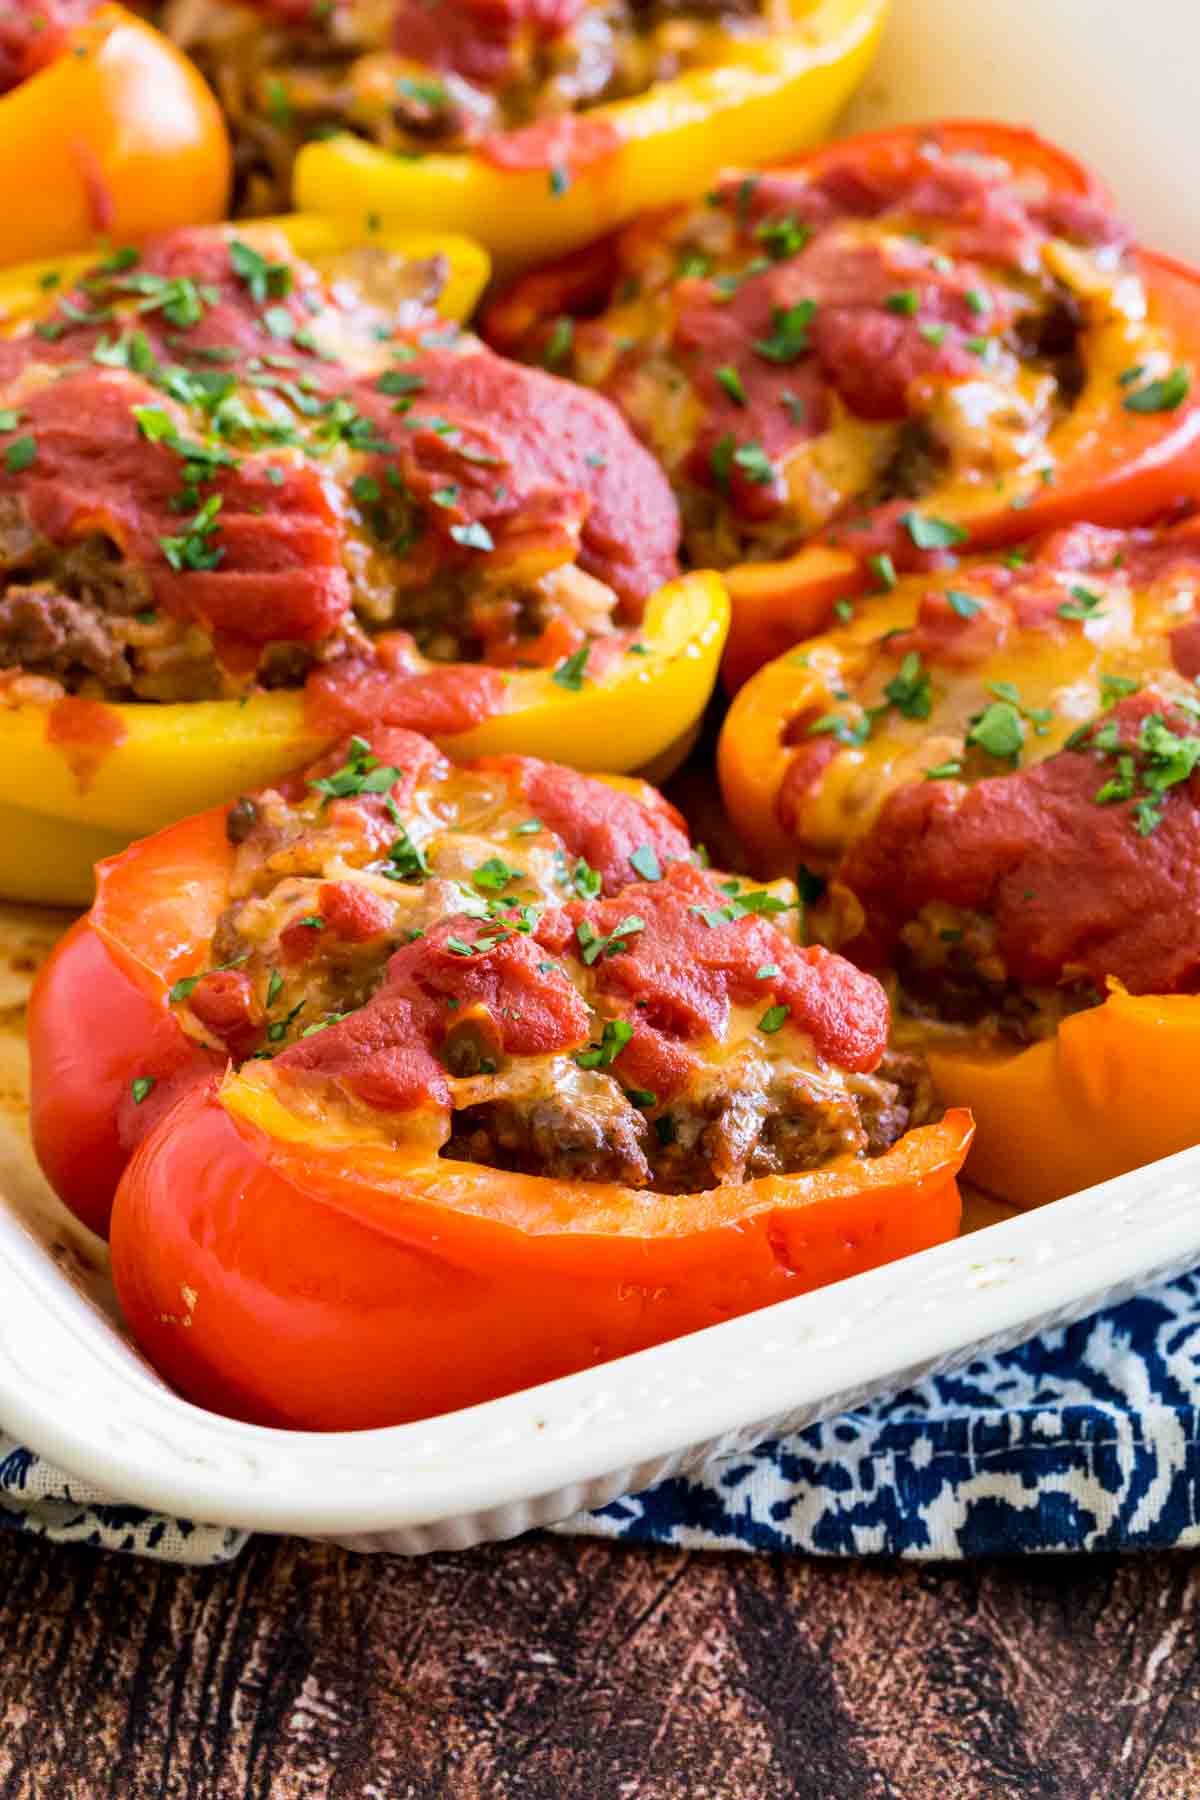 Stuffed peppers in a white ceramic baking dish.